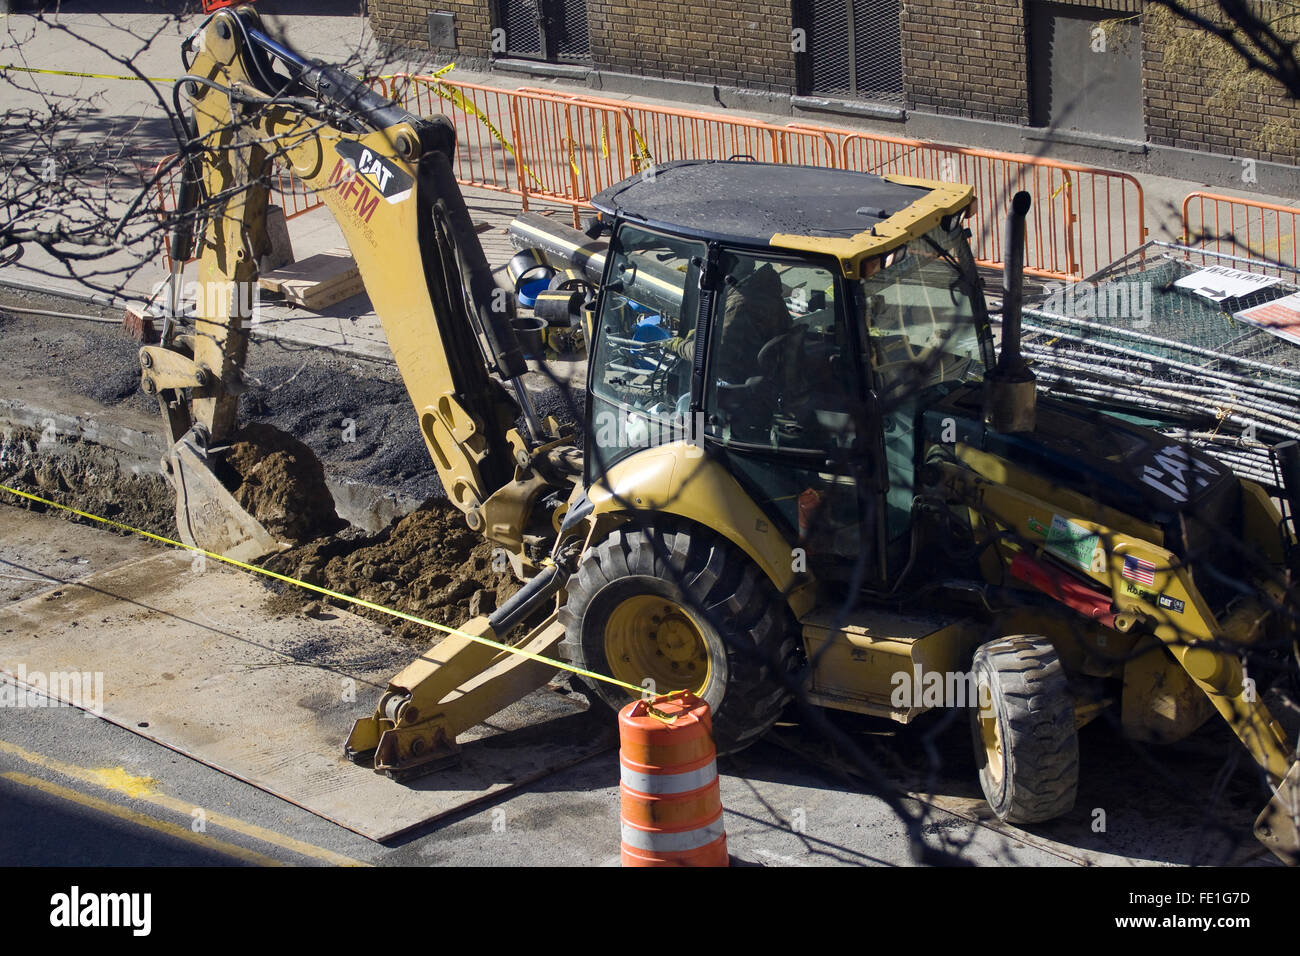 Construction Worker operating a yellow Backhoe made by the Caterpillar Corporation that is digging up a city street Stock Photo